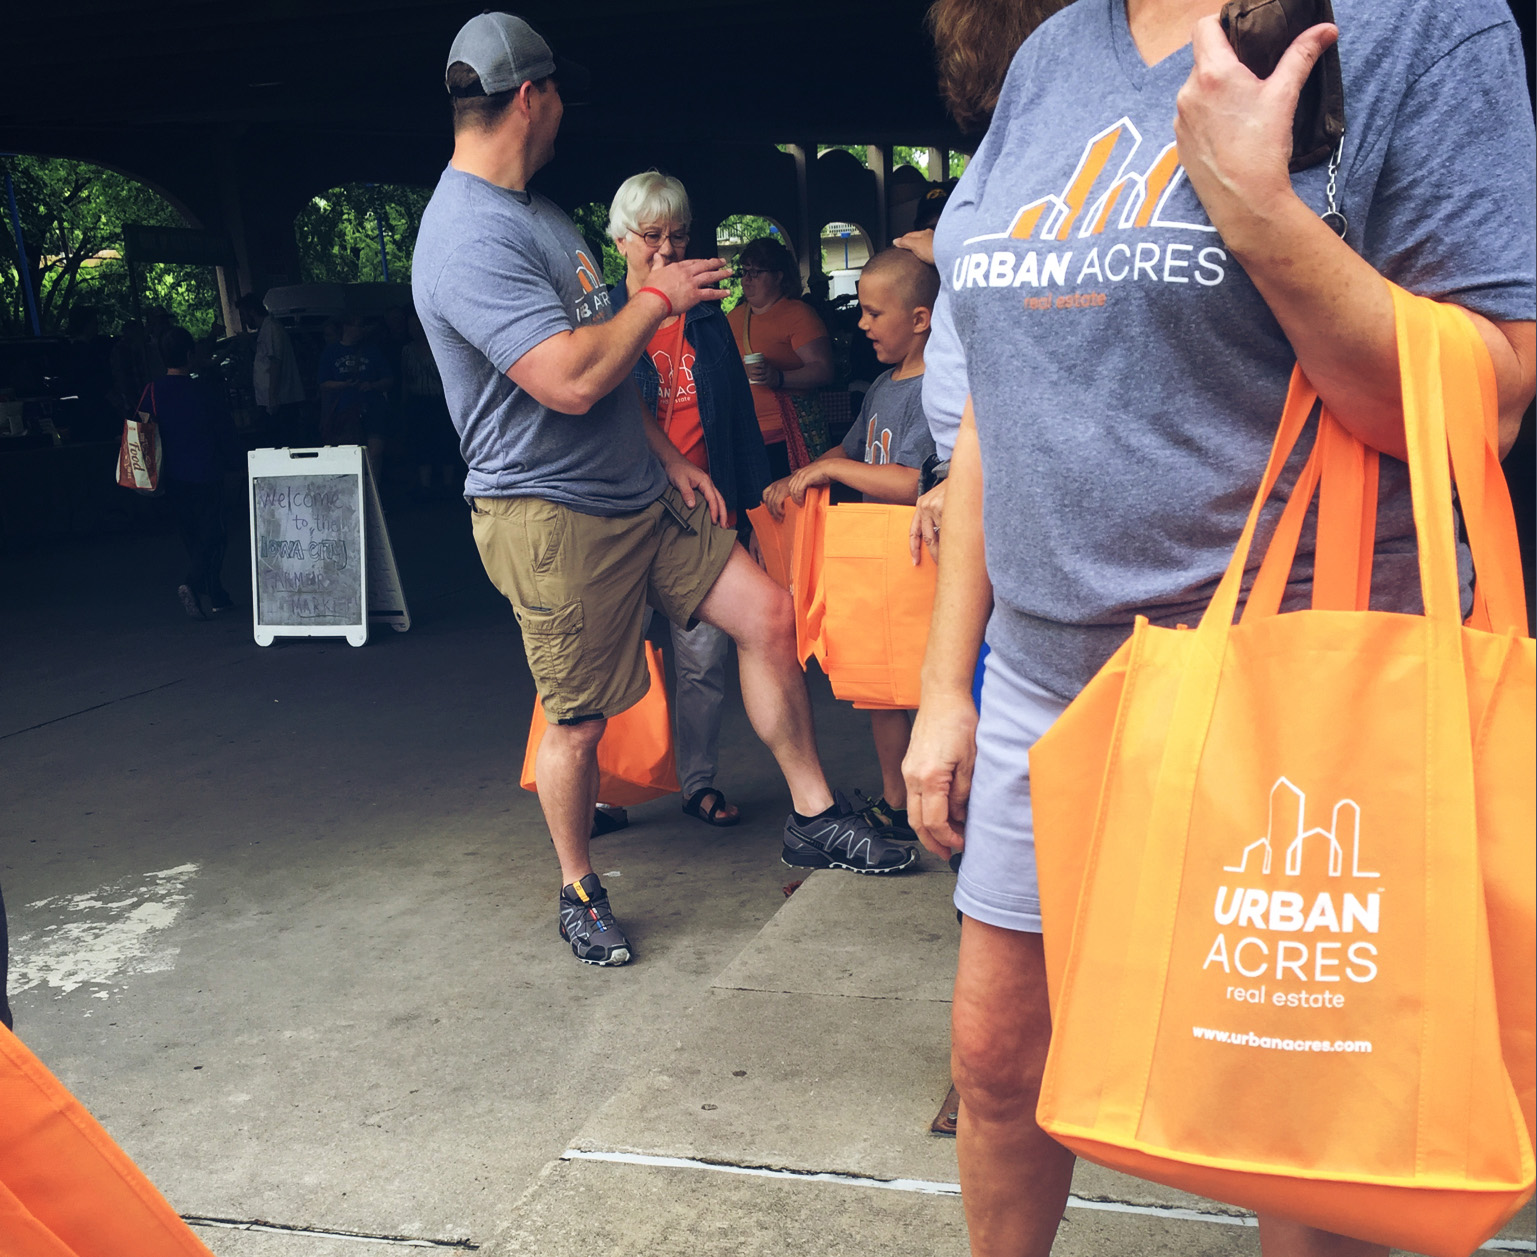 A group of individuals holding orange Urban Acres canvas bags